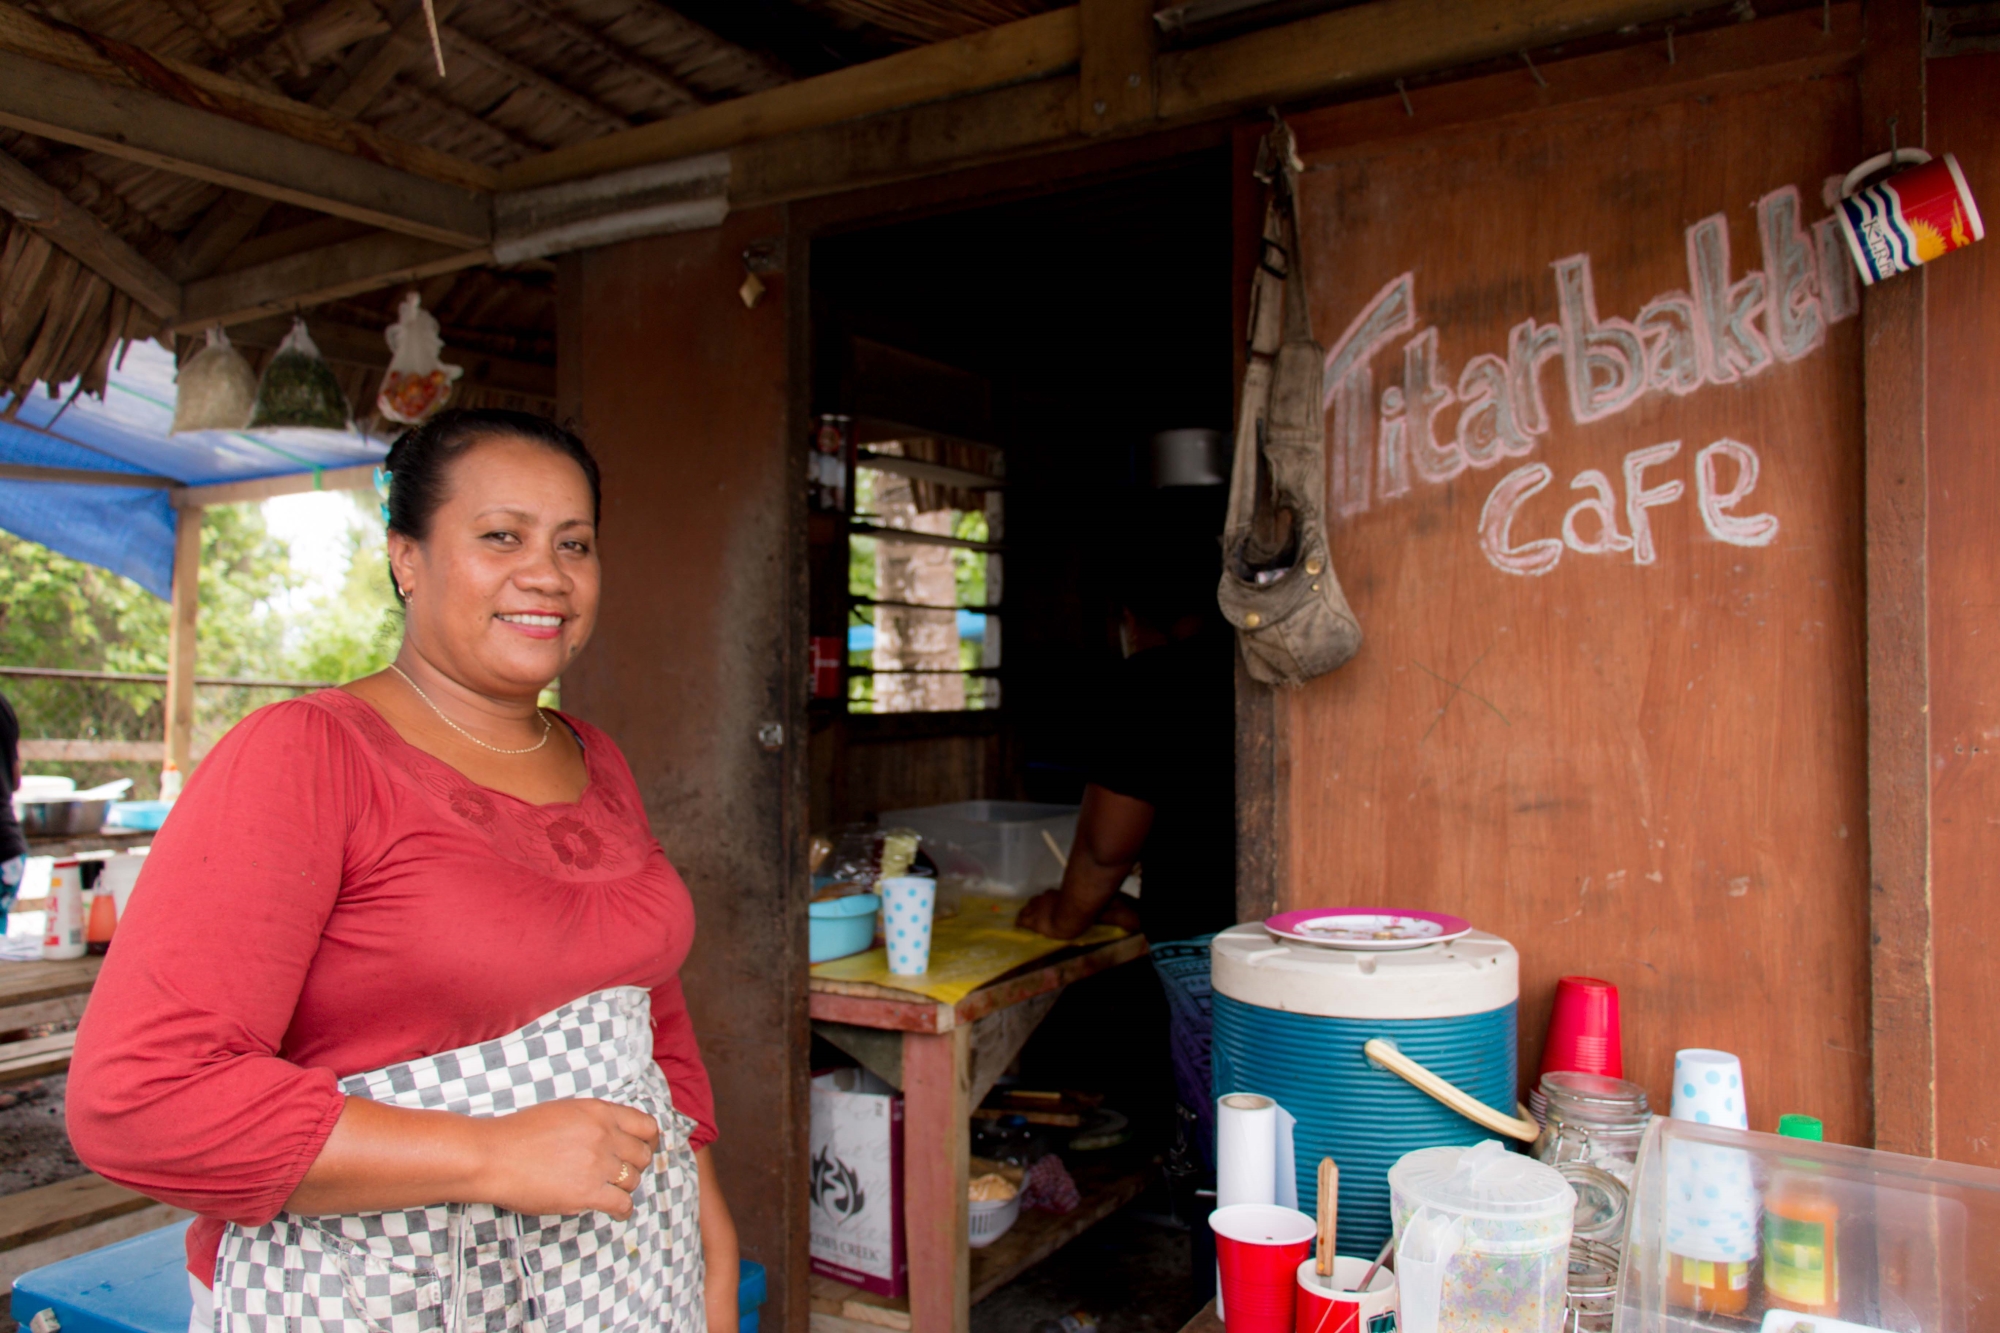 Image of a Kiribati woman wearing a red shirt and a black and white checked apron around her waist. She is standing in front of the cafe she owns, the wall behind her has "Titarbakti cafe" written on it. There is a table in the background with cups, jugs, a water cooler and other containers